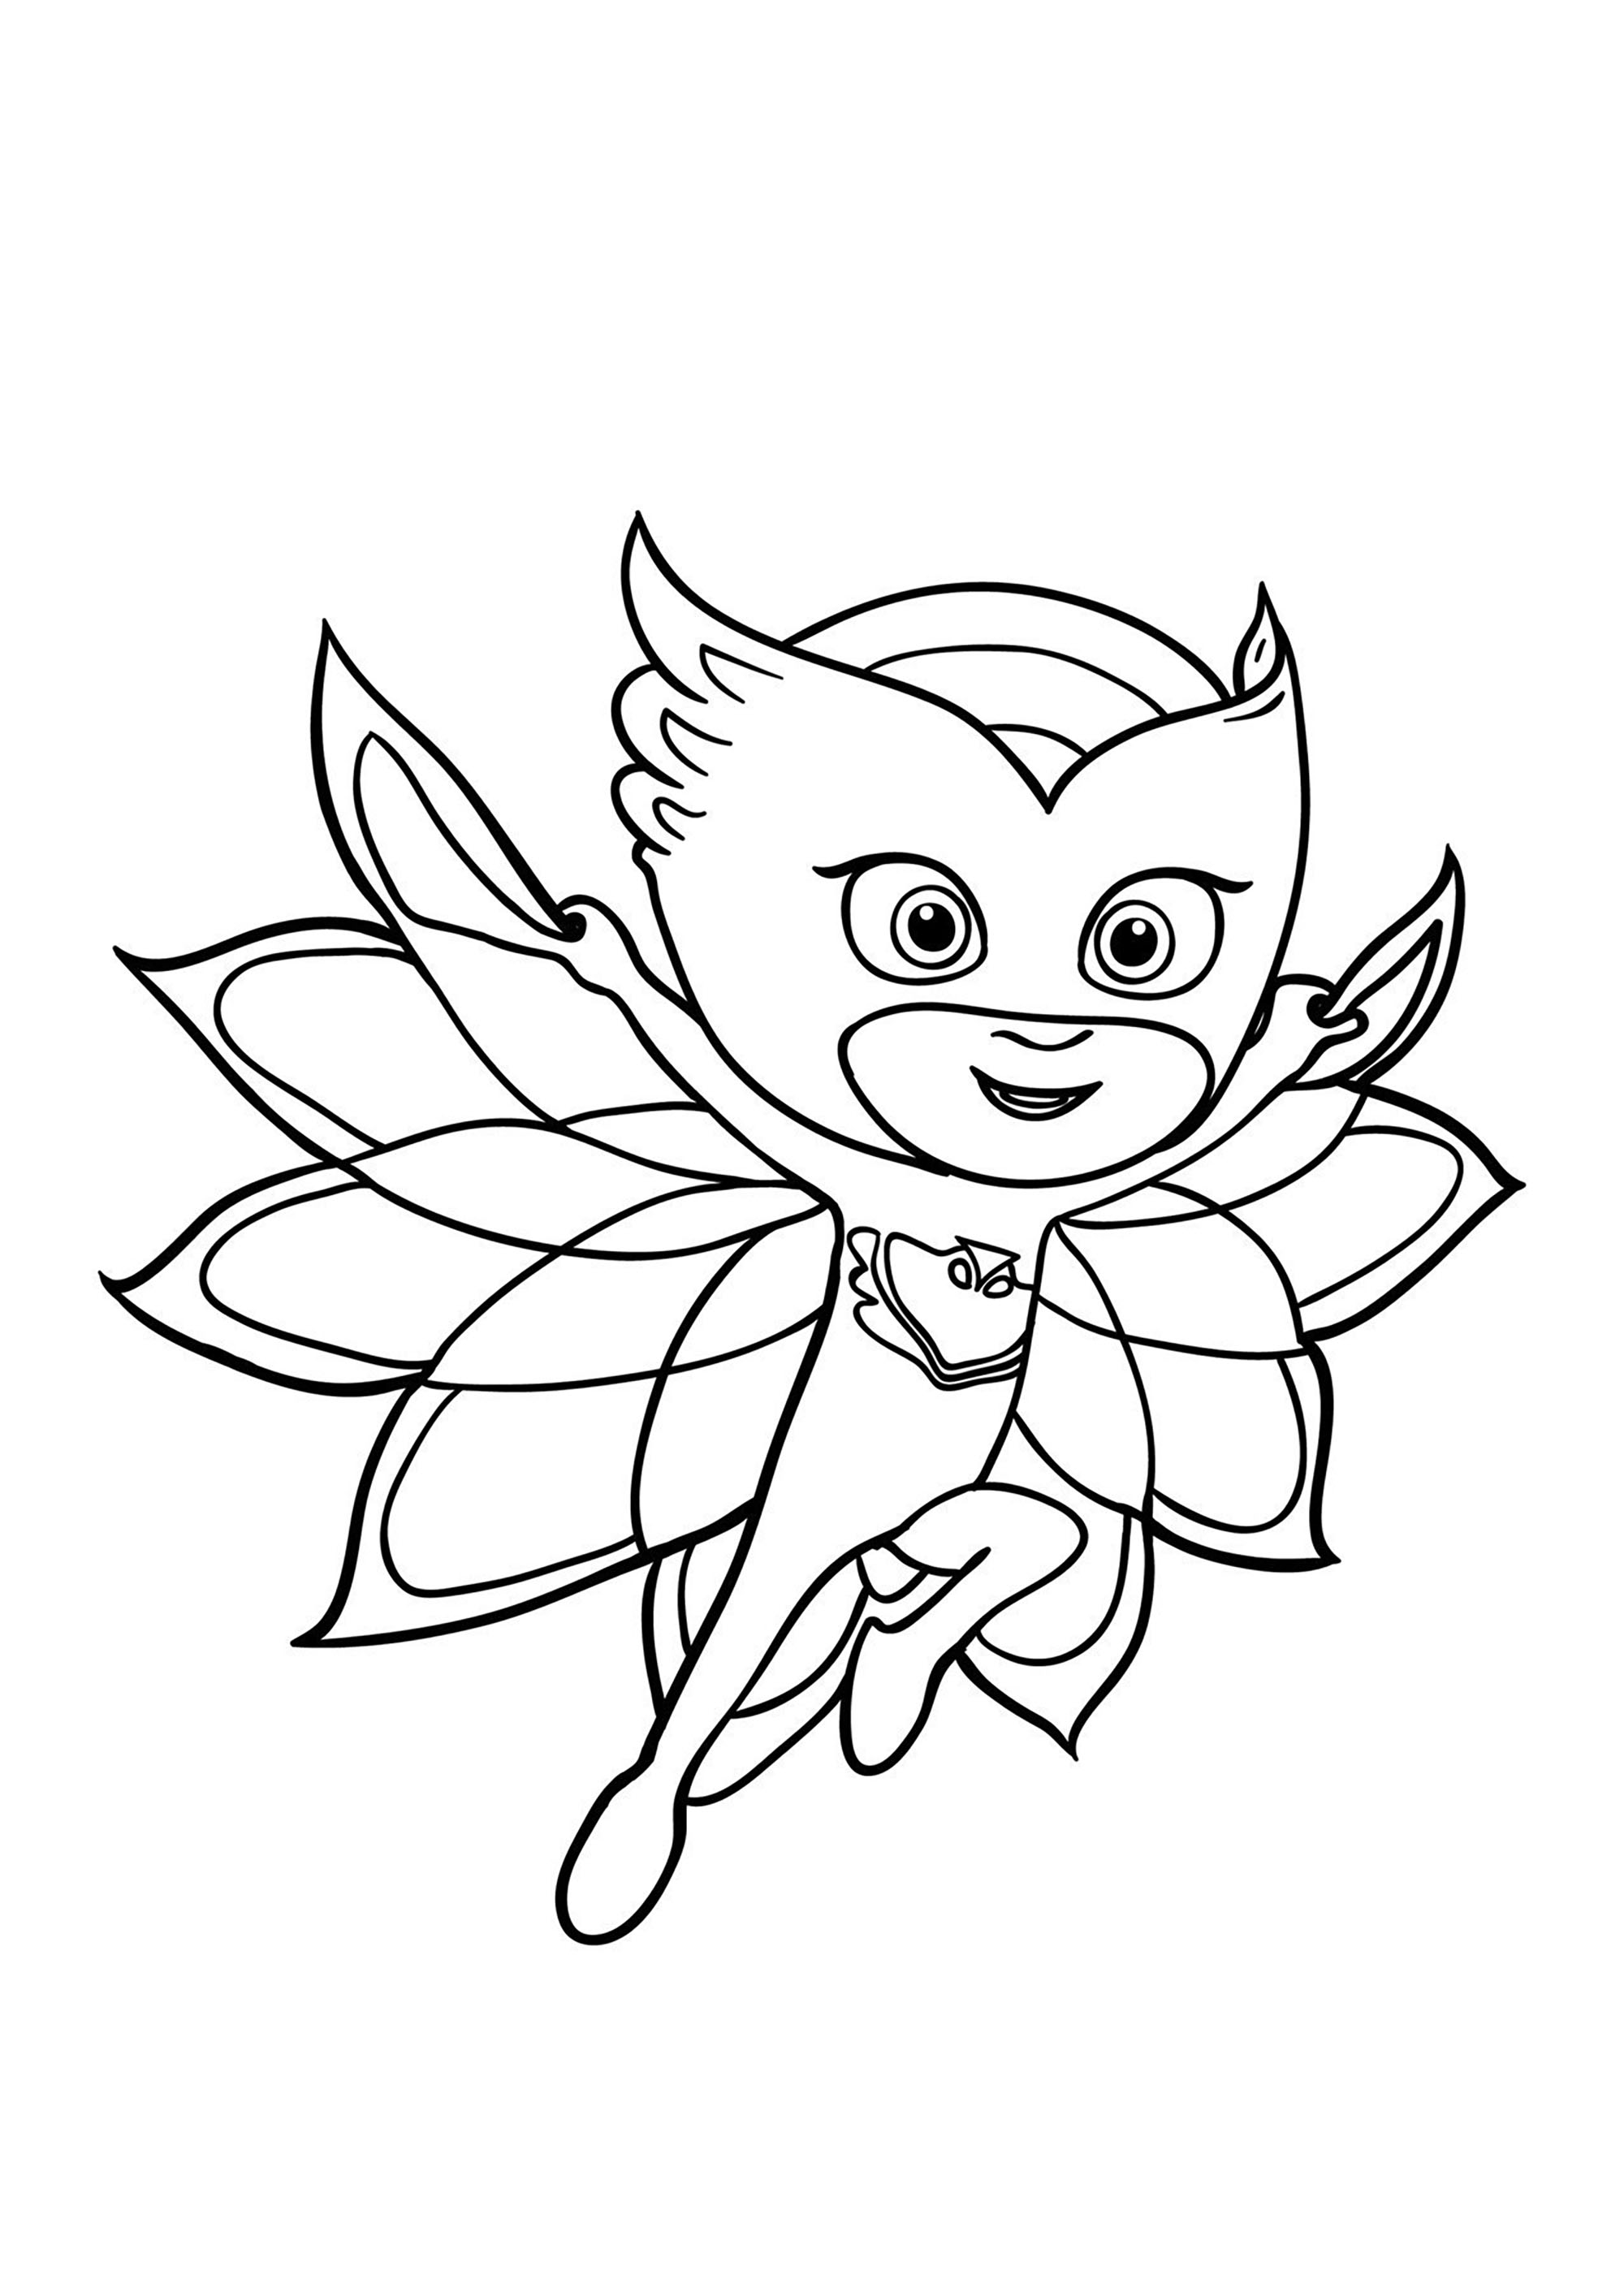 one-of-the-3-characters-of-the-pj-masks-series-pj-masks-kids-coloring-pages